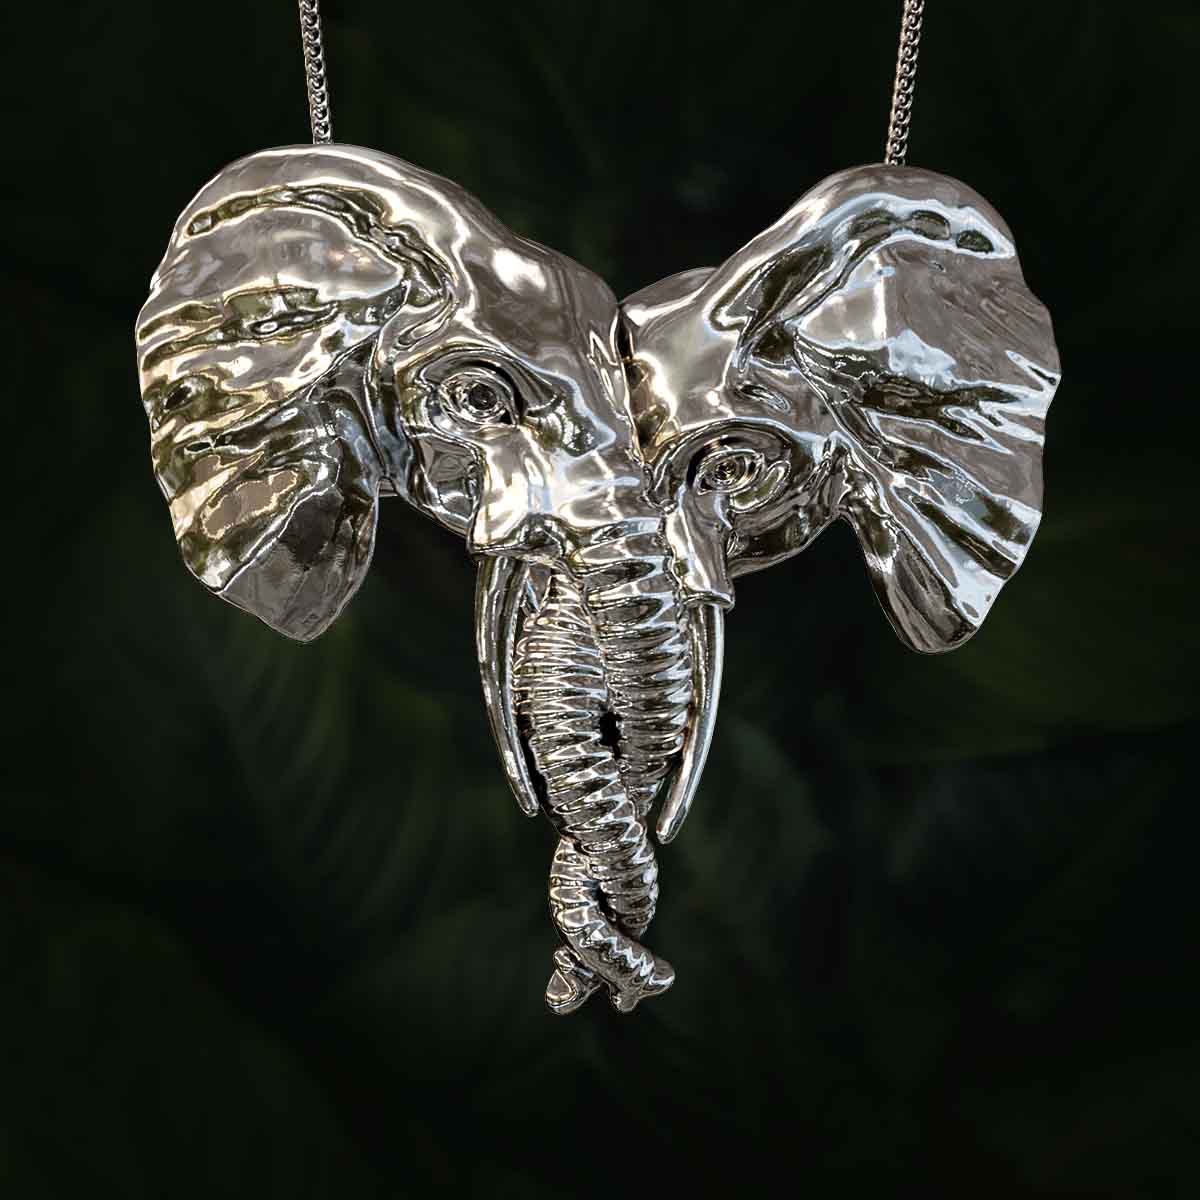 Main-Image-White-Gold-Rhodium-Finish-Elephant-Heads-with-Trunks-Entwined-Pendant-Jewelry-For-Necklace